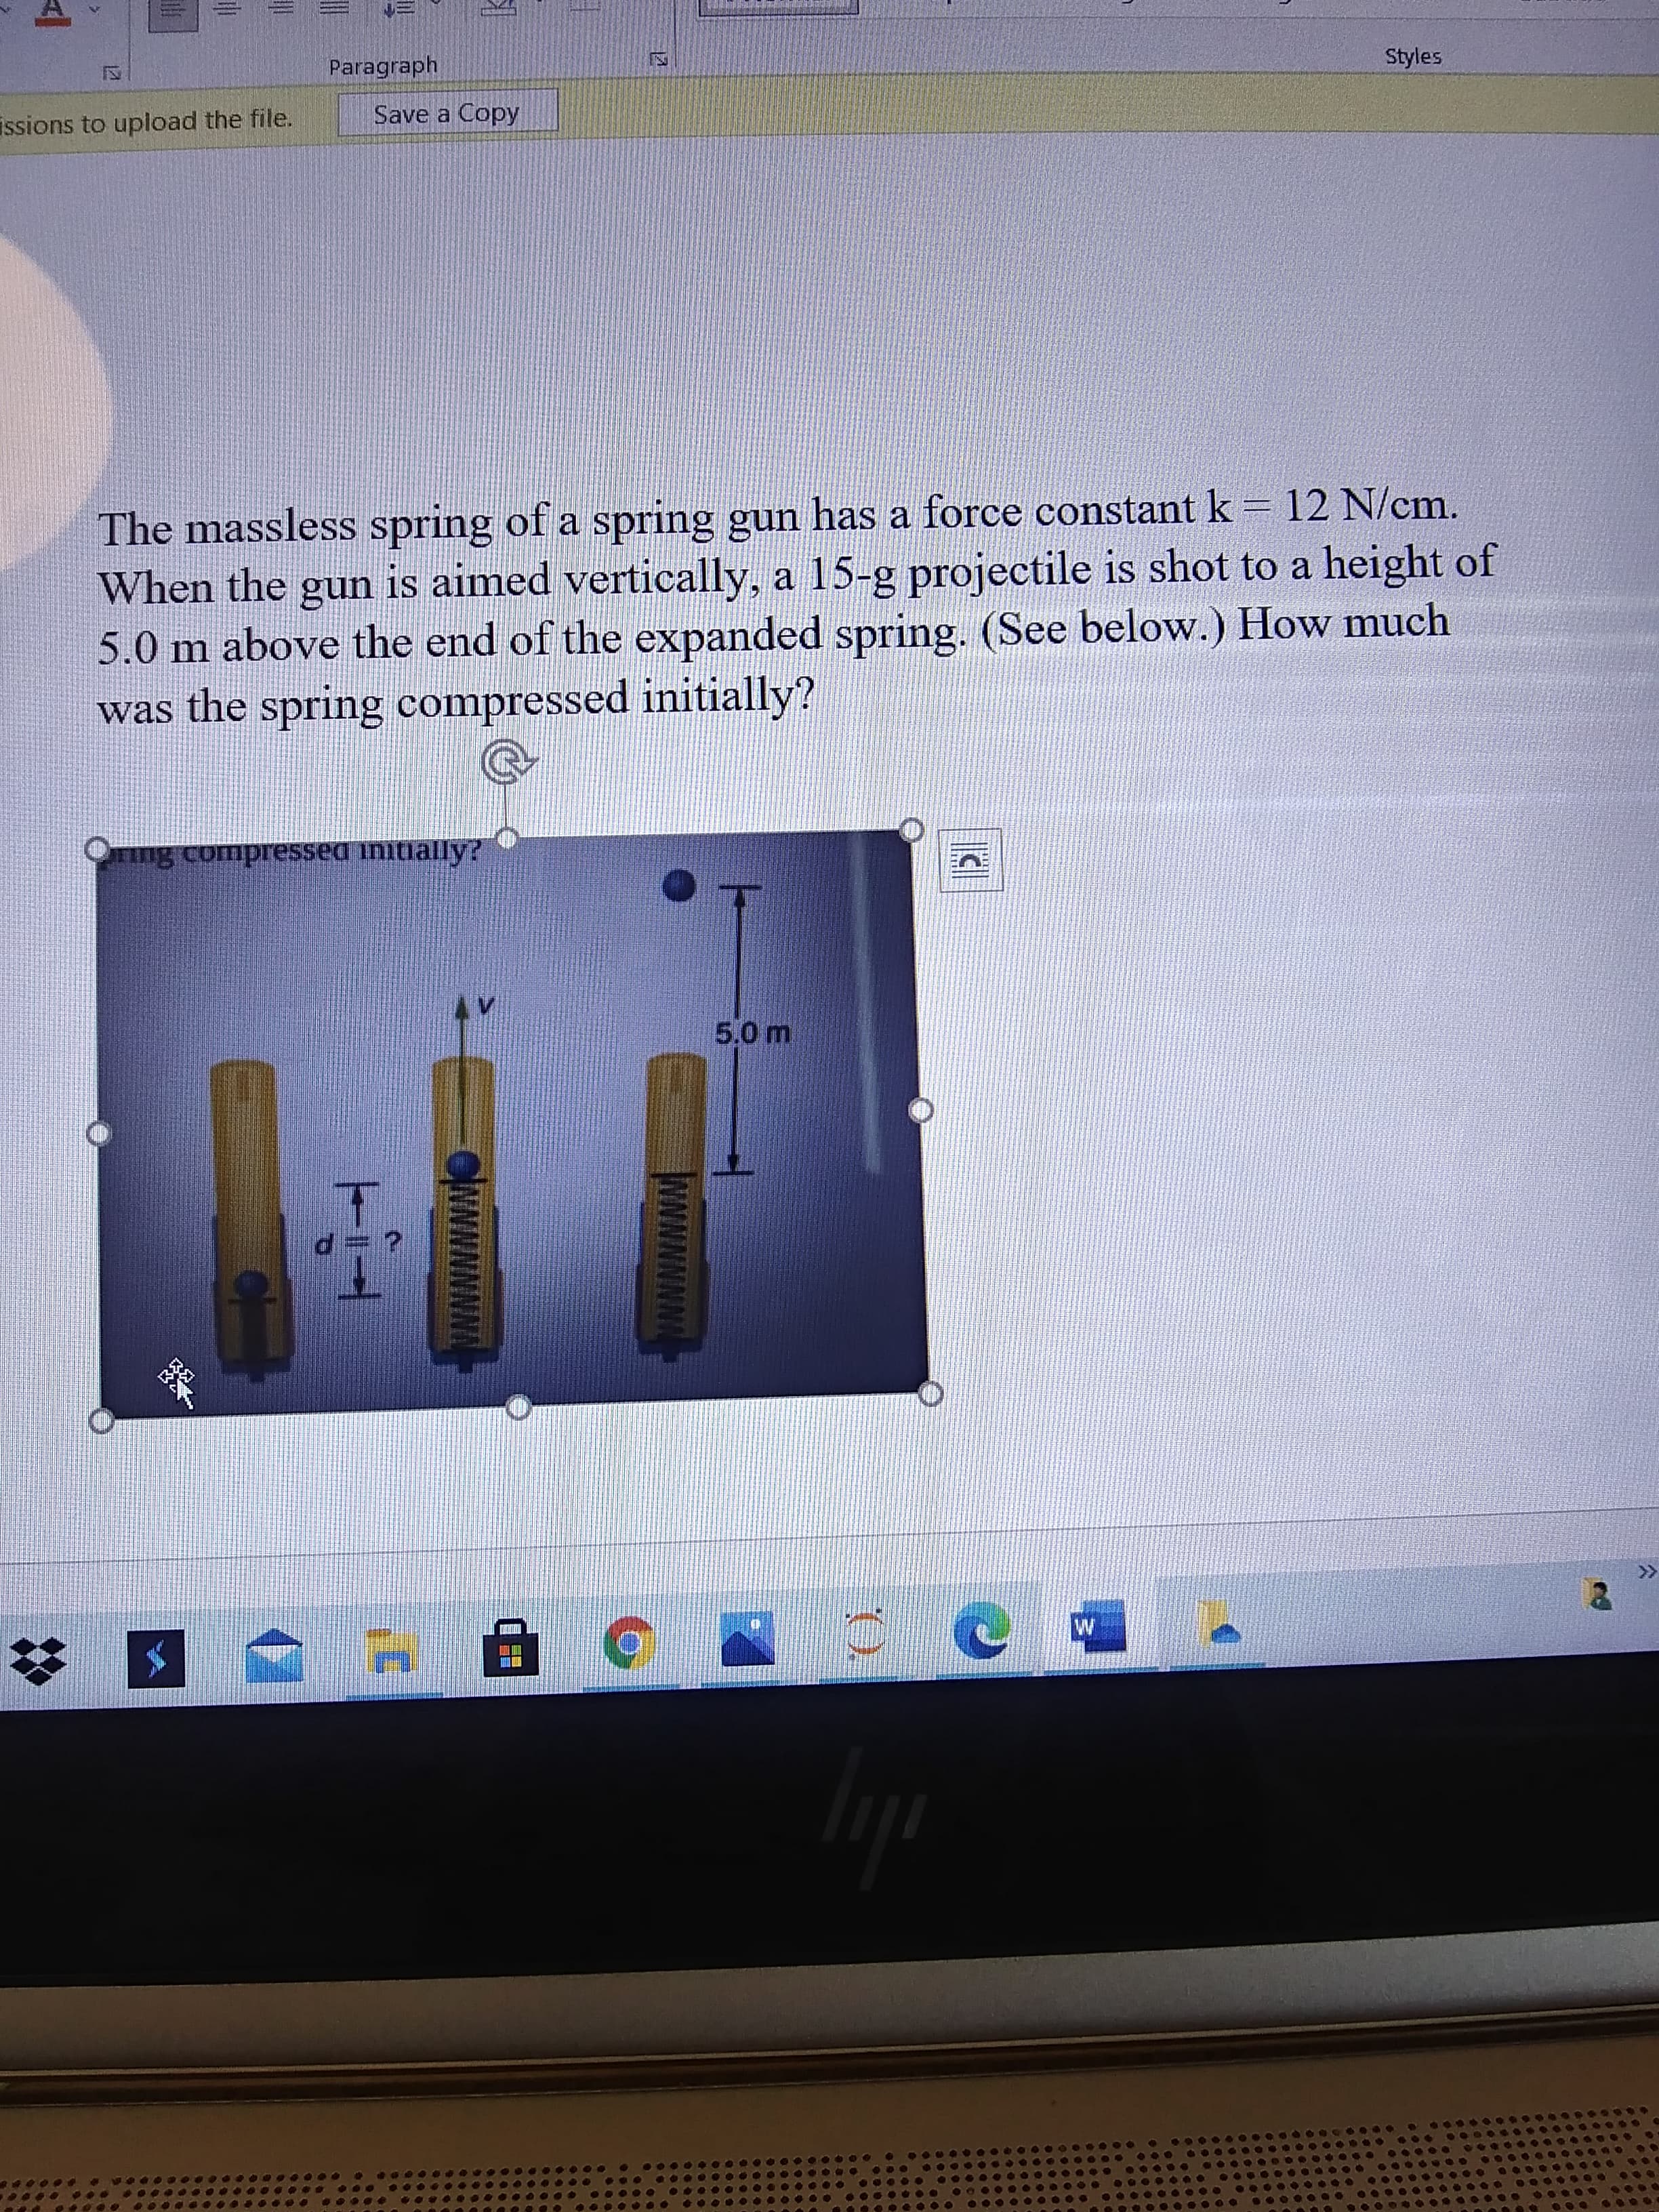 CAMNNN
12
Paragraph
Styles
issions to upload the file.
Save a Copy
The massless spring of a spring gun has a force constant k = 12 N/cm.
When the gun is aimed vertically, a 15-g projectile is shot to a height of
5.0 m above the end of the expanded spring. (See below.) How much
was the spring compressed initially?
Tng compressed initially?
